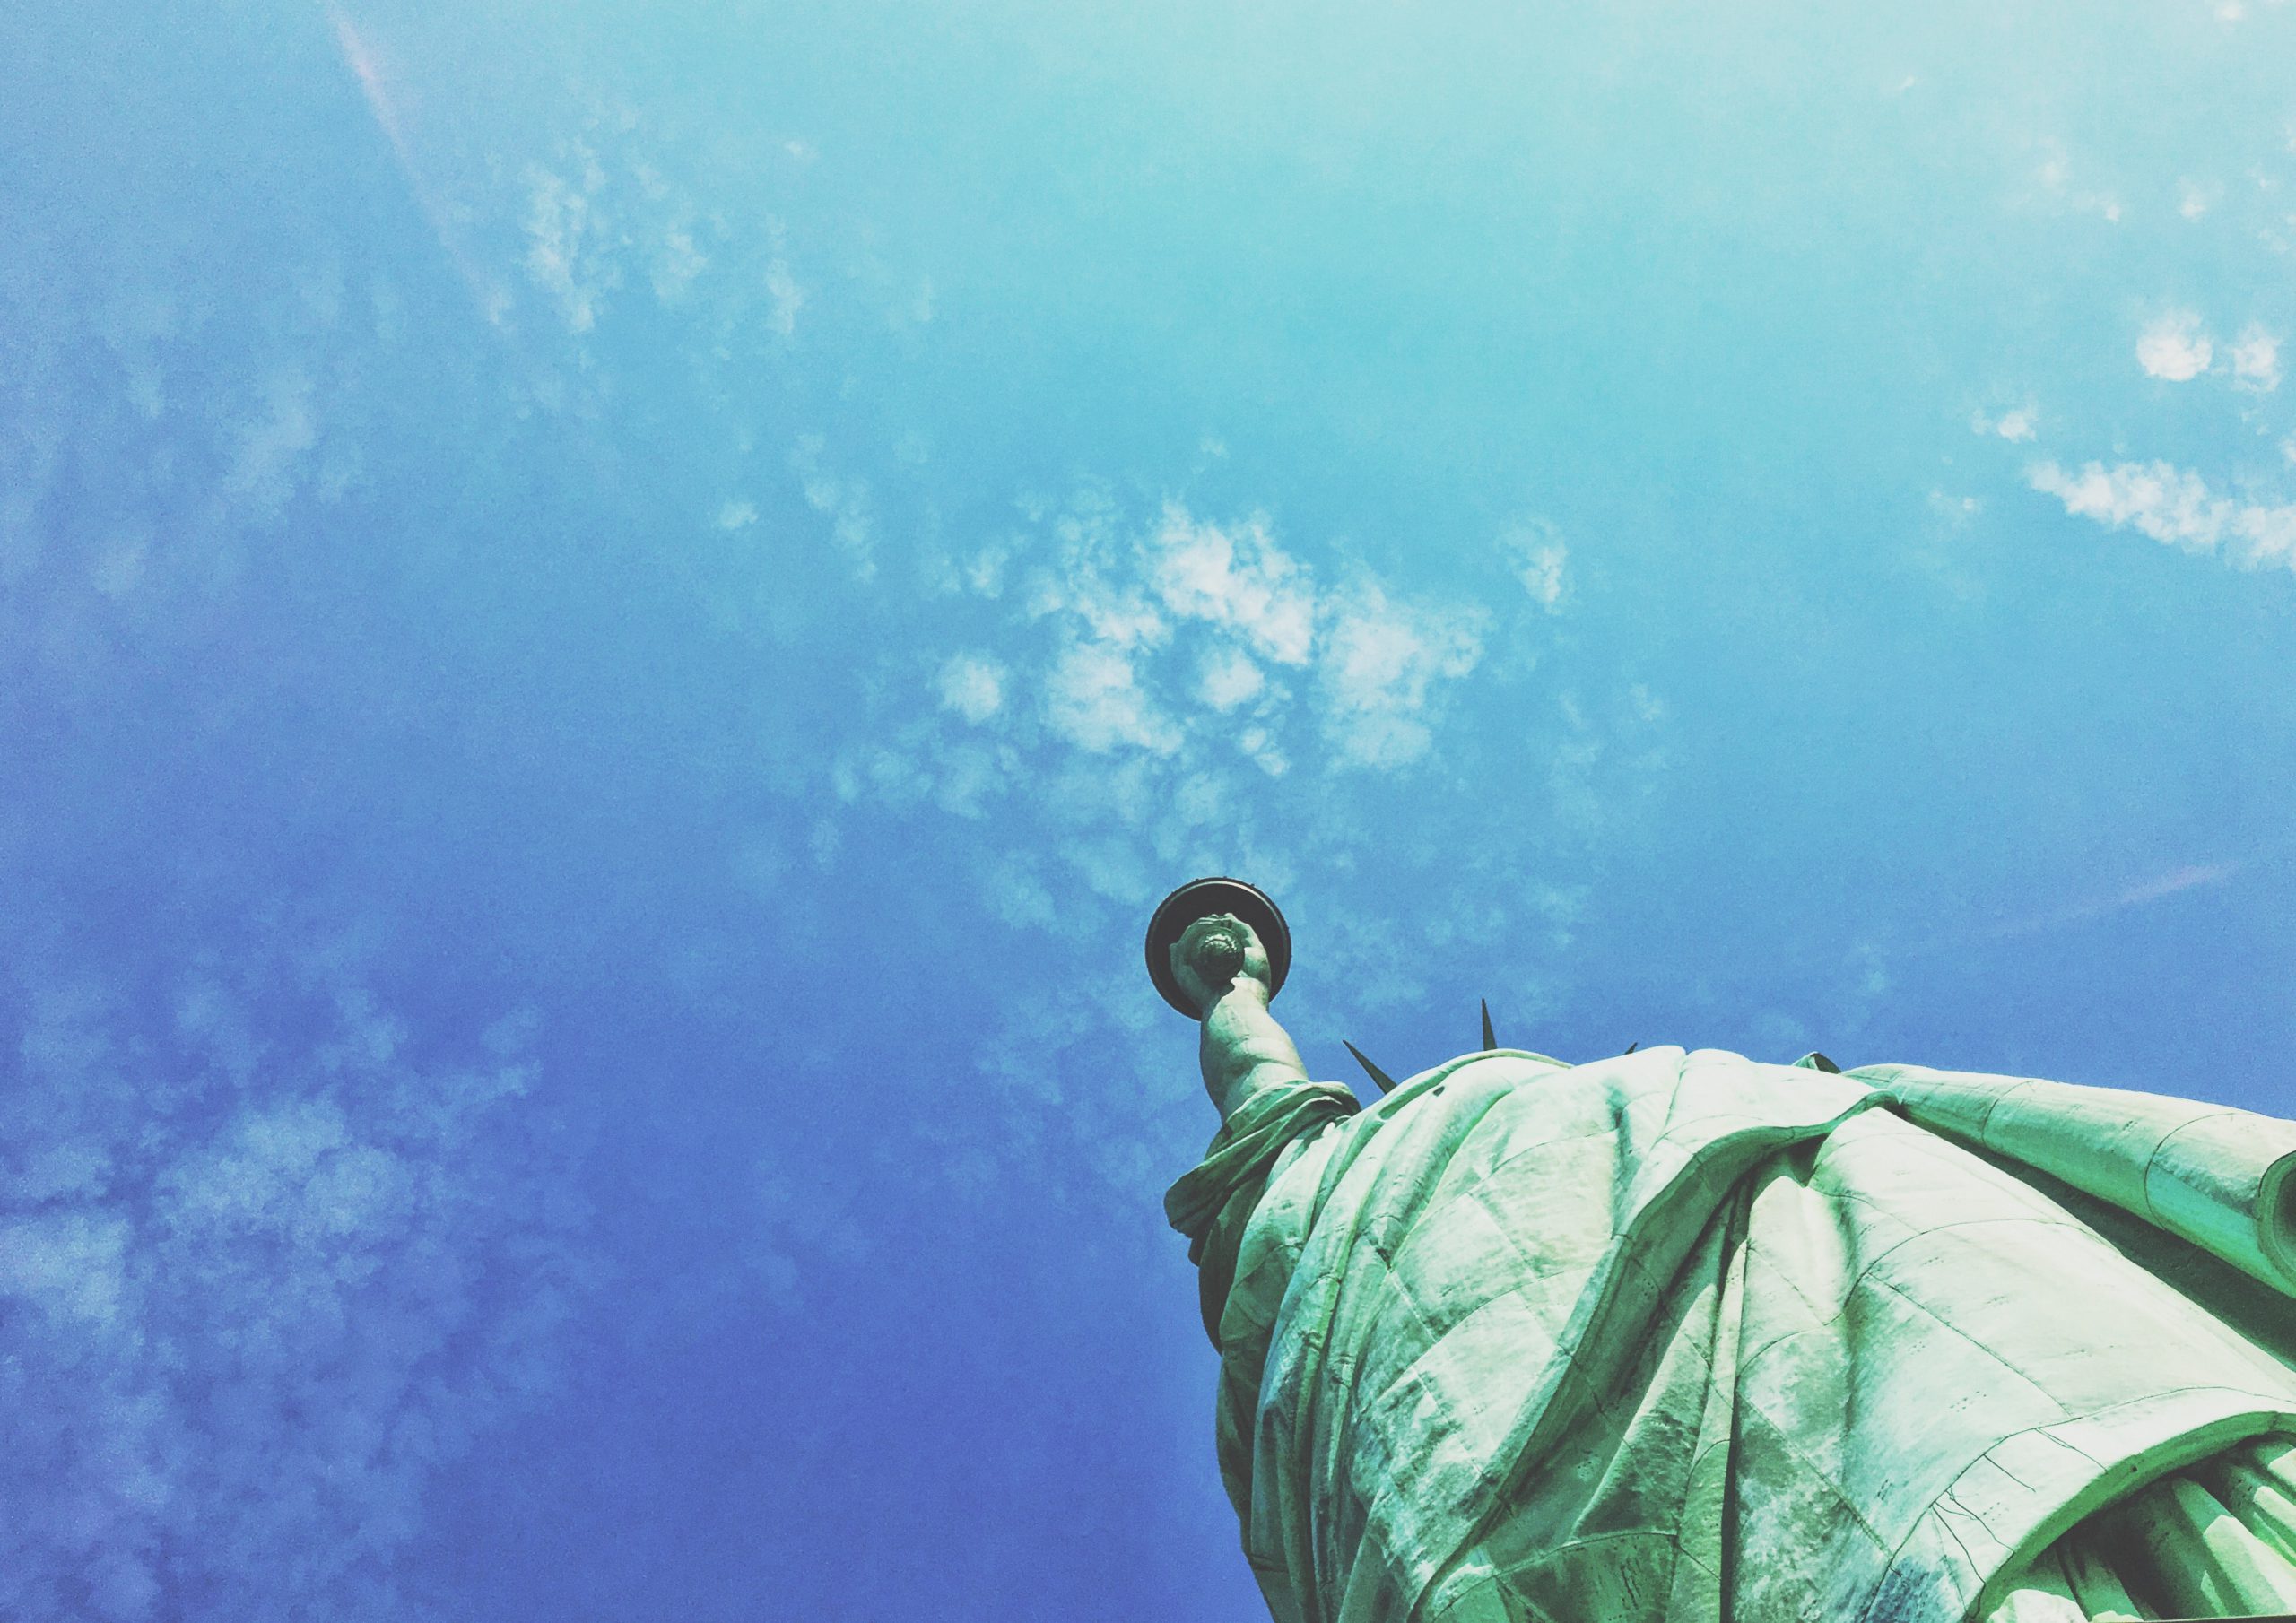 Shot from below - the statue of liberty against a blue sky. Deferred Action for Childhood Arrivals (DACA).